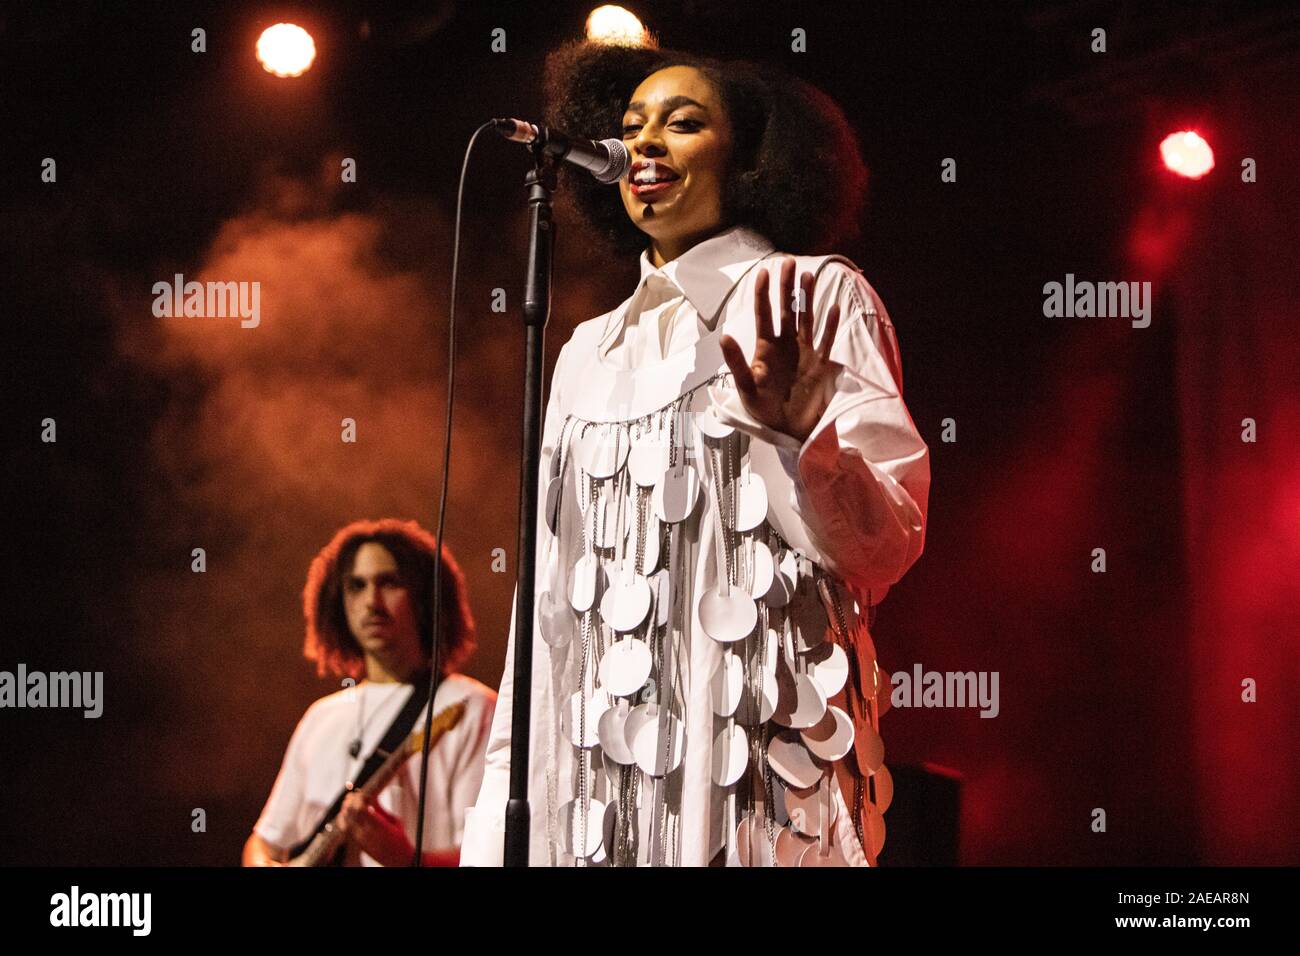 Milan Italy. 07 December 2019. The American/British singer and songwriter Celeste Epiphany Waite known mononymously as CELESTE performs live on stage at Fabrique opening the show of Michael Kiwanuka. Stock Photo